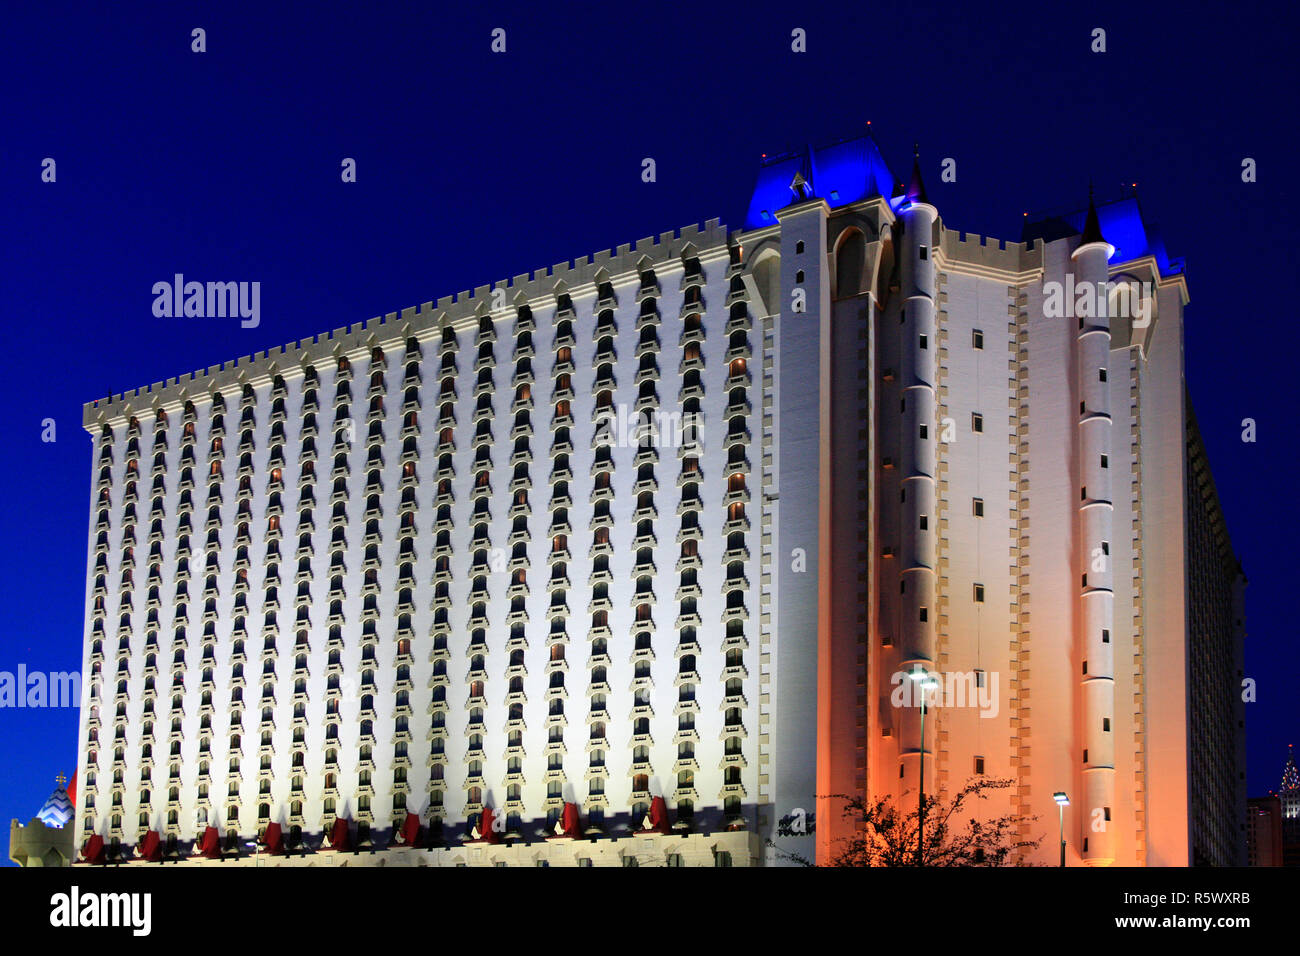 The Excalibur hotel at night, lit up like a fairytale castle in Las Vegas, Nevada Stock Photo